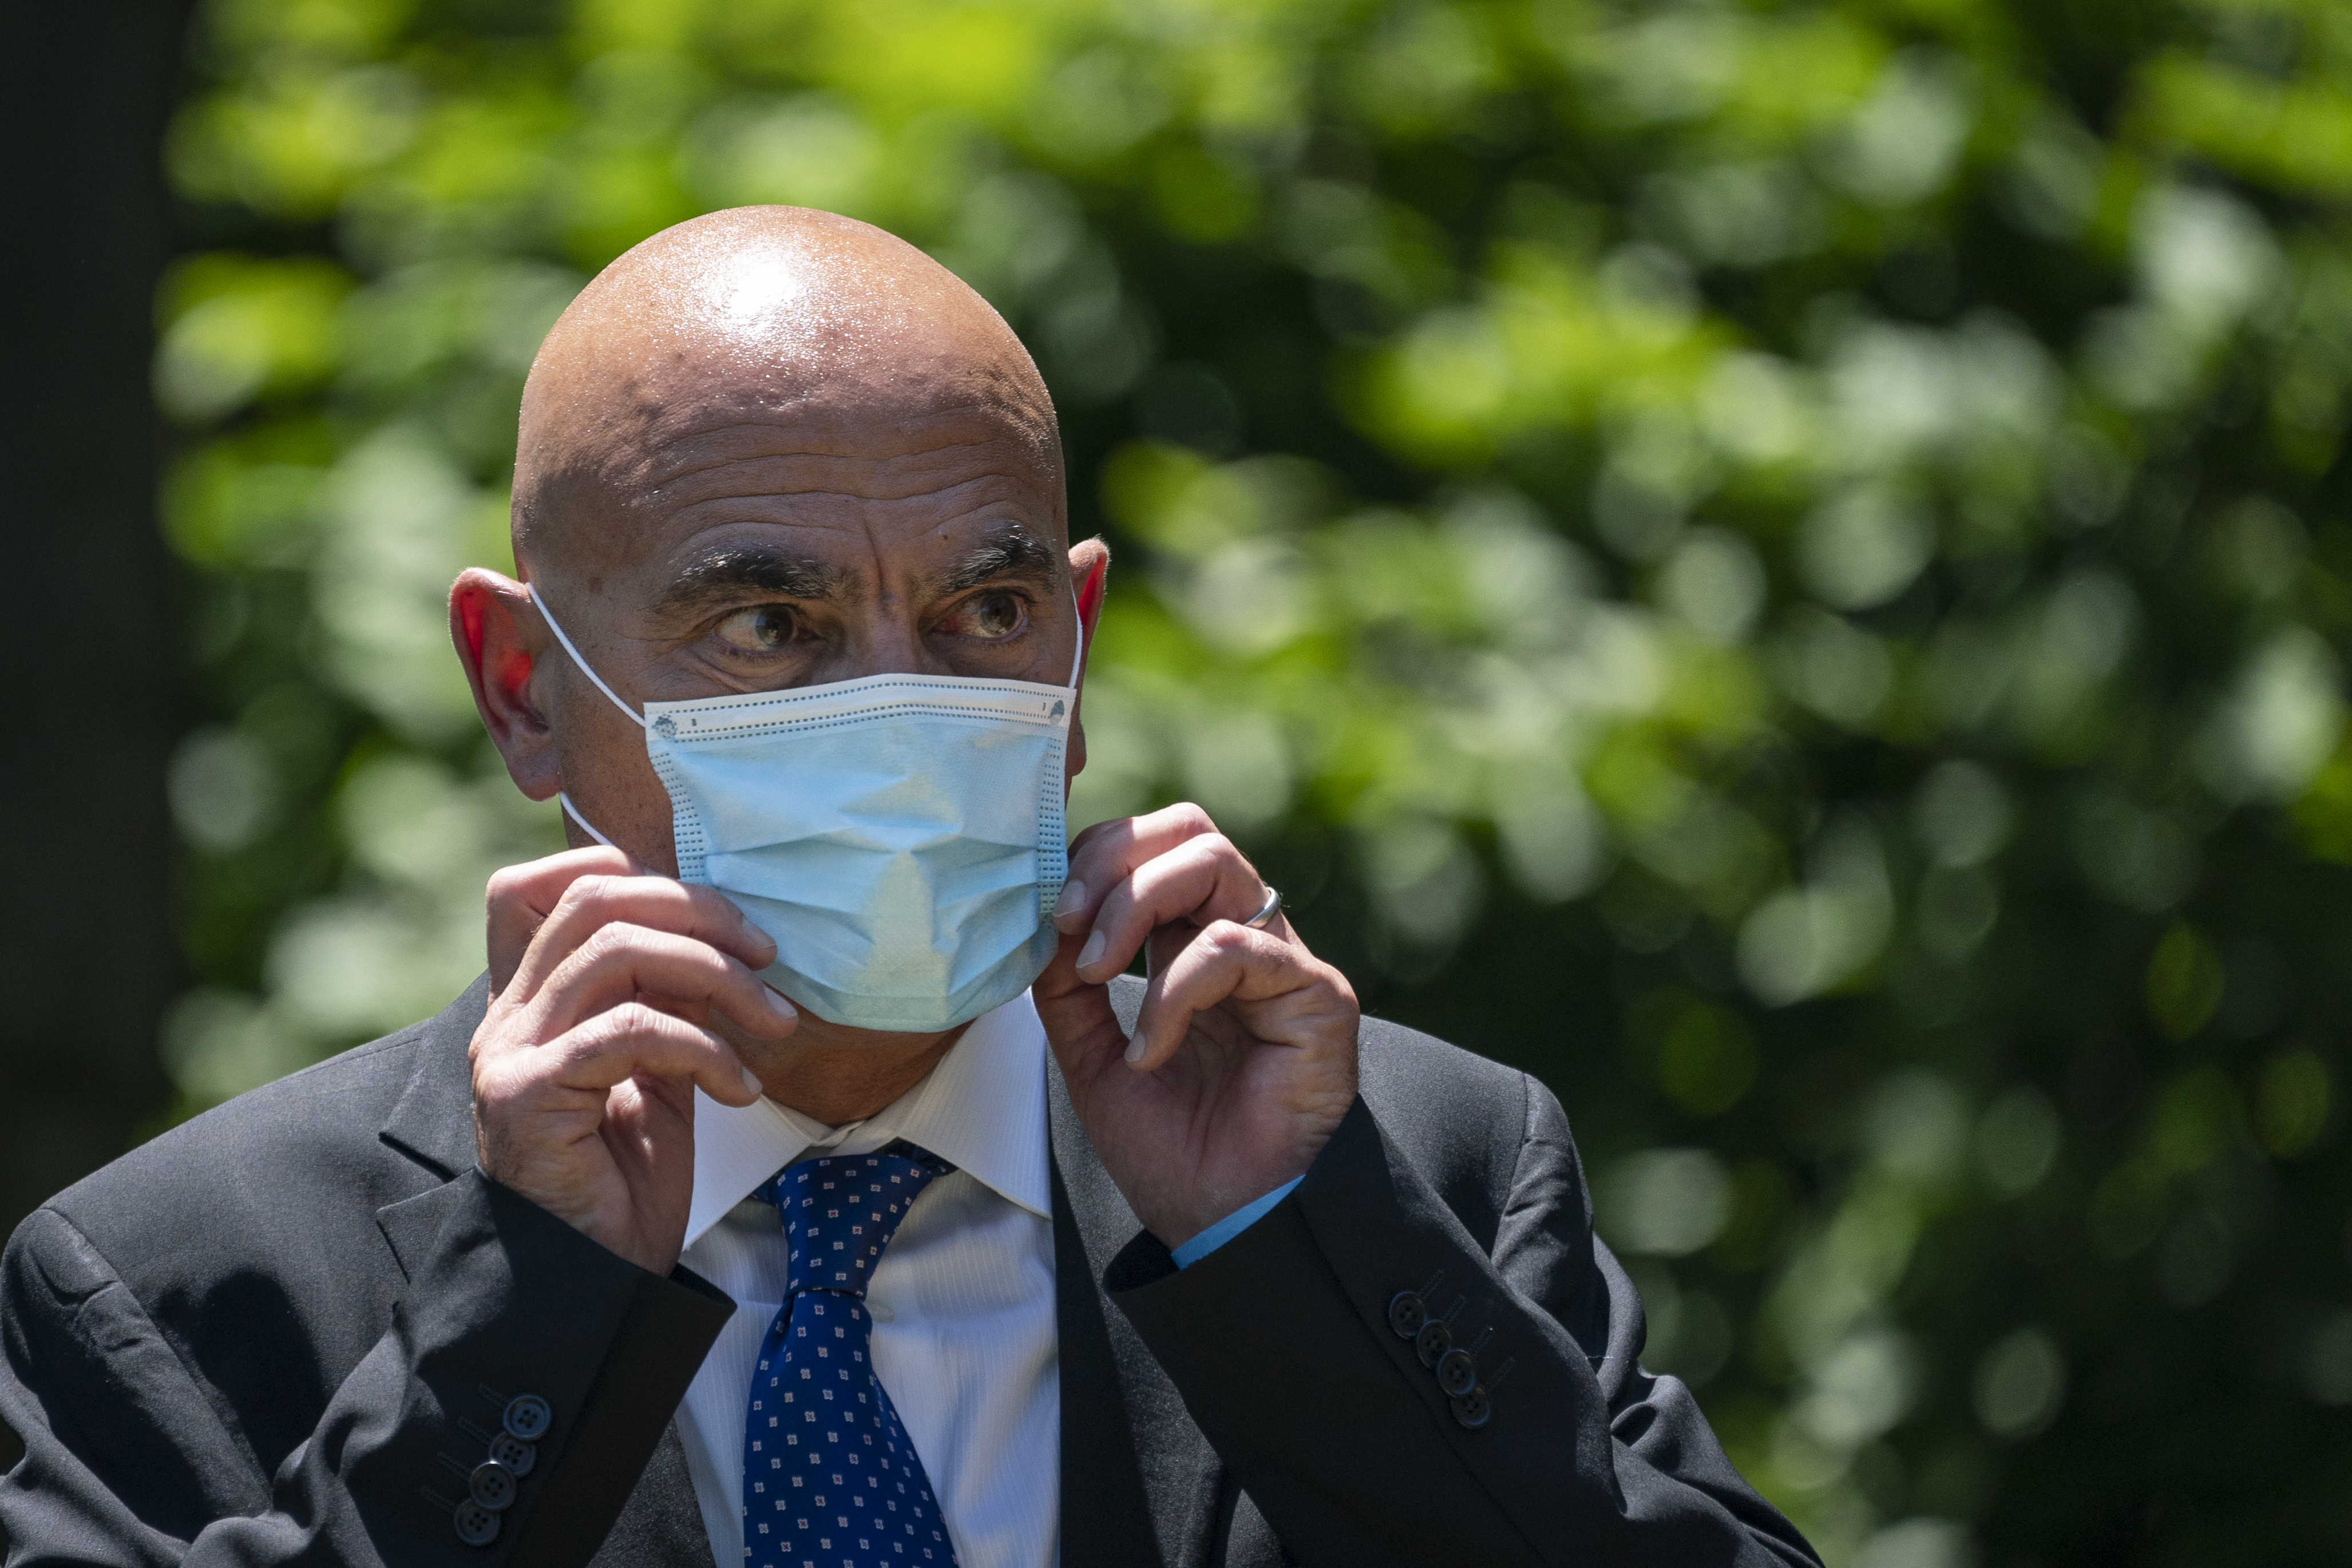 Moncef Slaoui, head of the White House's "Operation Warp Speed" project to develop a coronavirus vaccine, listens to U.S. President Donald Trump deliversremarks about vaccine development in the Rose Garden of the White House on May 15, 2020 in Washington, DC. (Drew Angerer—Getty Images)